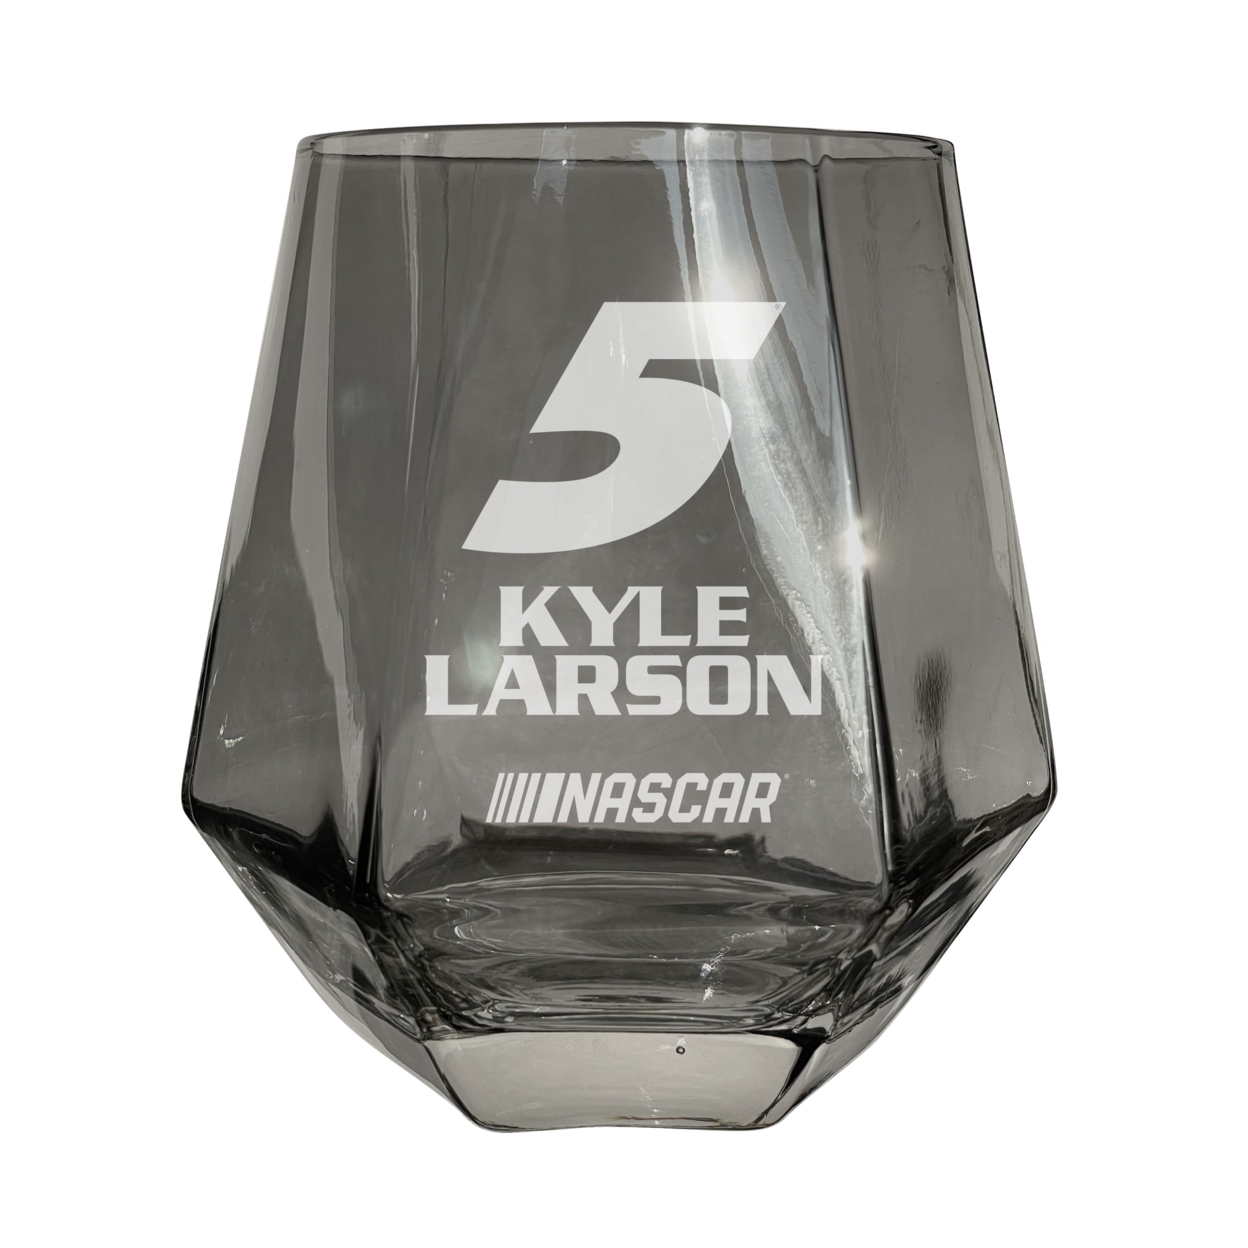 #5 Kyle Larson Officially Licensed 10 Oz Engraved Diamond Wine Glass - Clear, 2-Pack